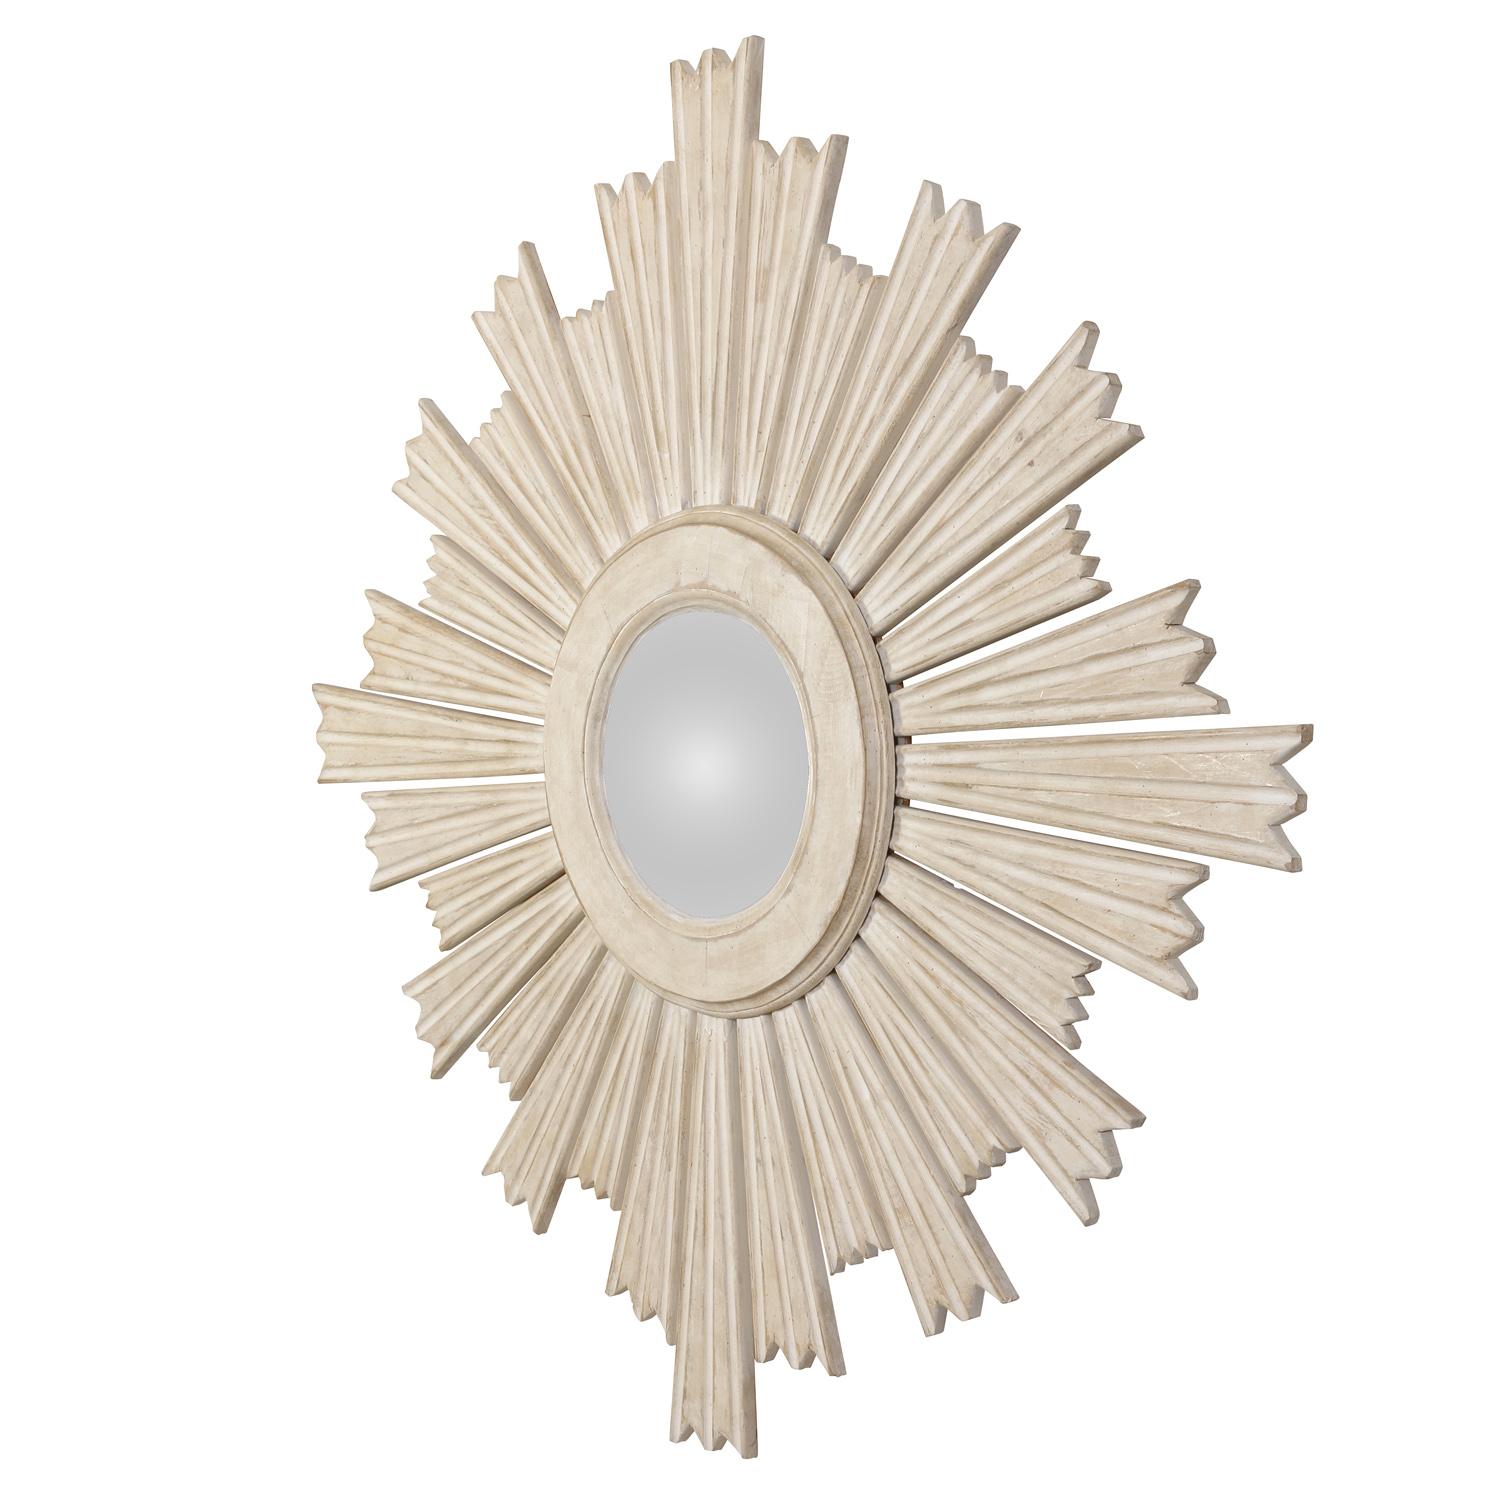 A large painted white sunburst mirror with varying lengths of rays connecting to a center molded ring.  The mirror is painted in a grayish white.  Its size and scale make this mirror the perfect piece to add a bit of drama to a space.